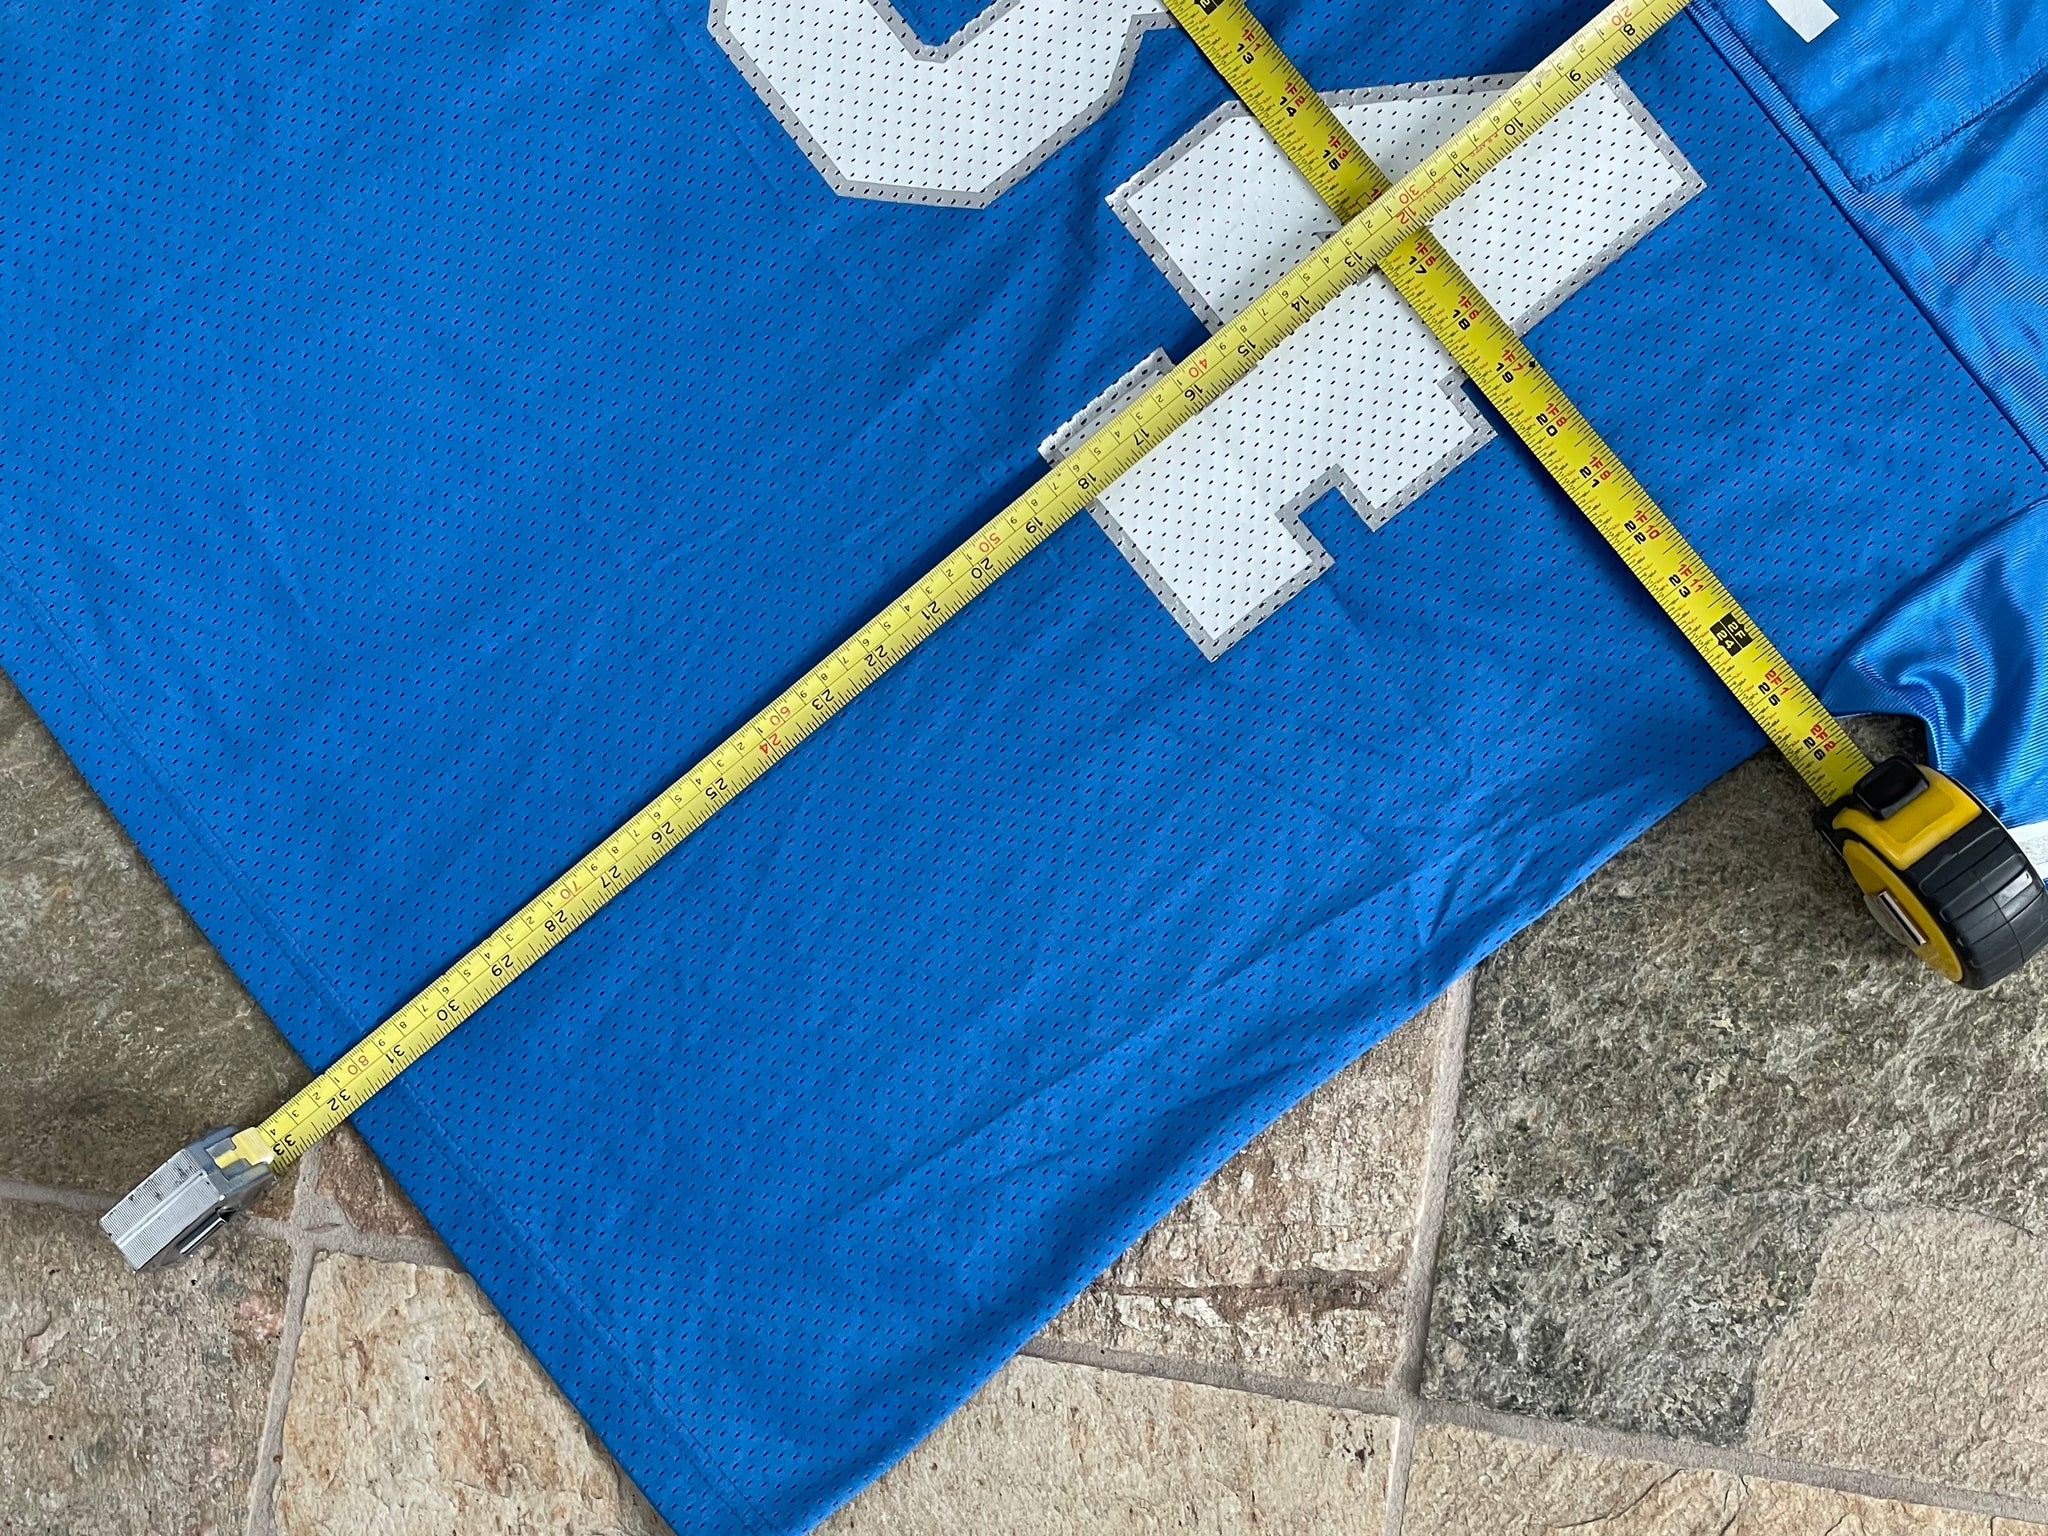 Herman Moore 1996 Detroit Lions Legacy Jersey – All Things Marketplace